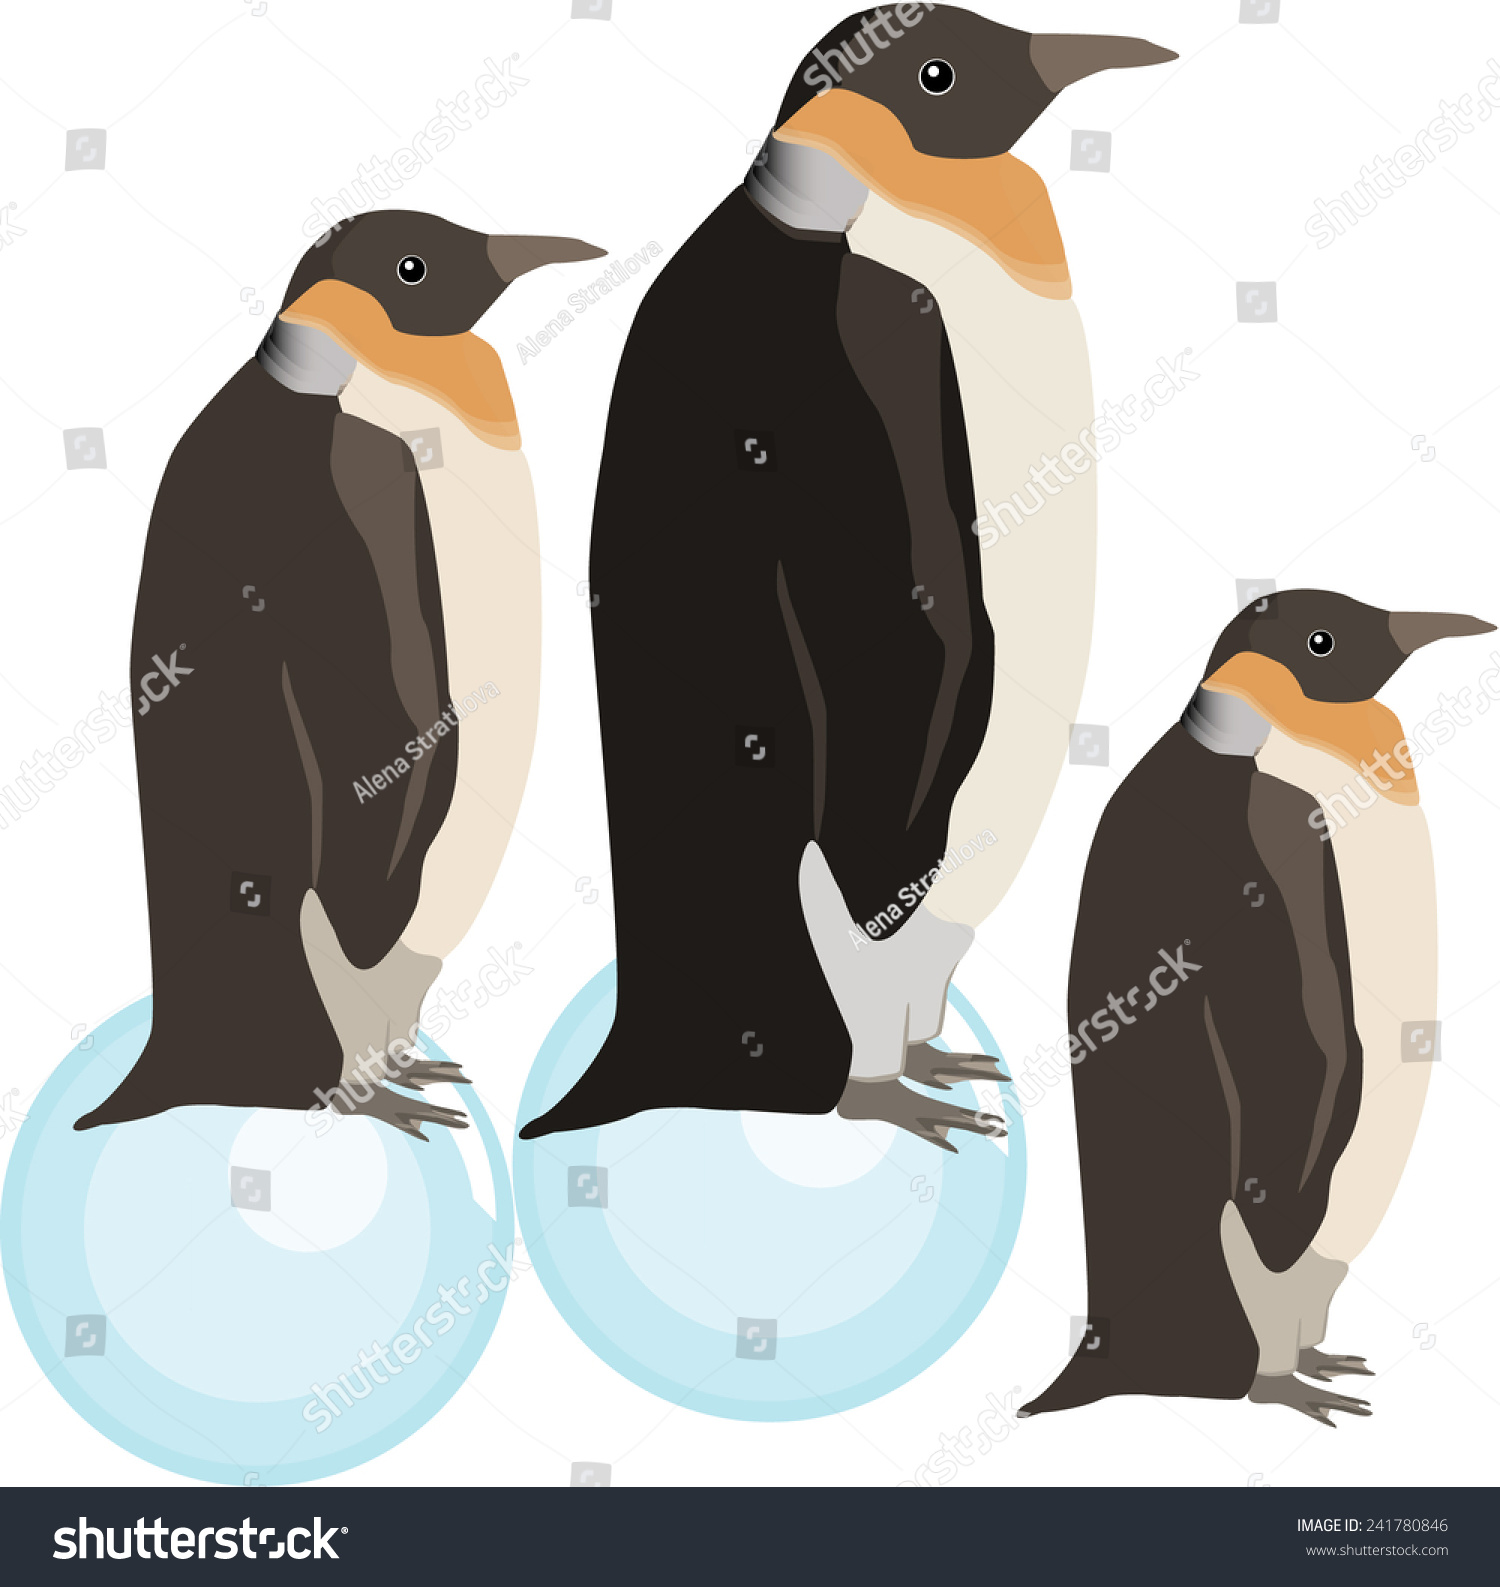 Download Edit Vectors Free Online - penguins and round | Shutterstock Editor